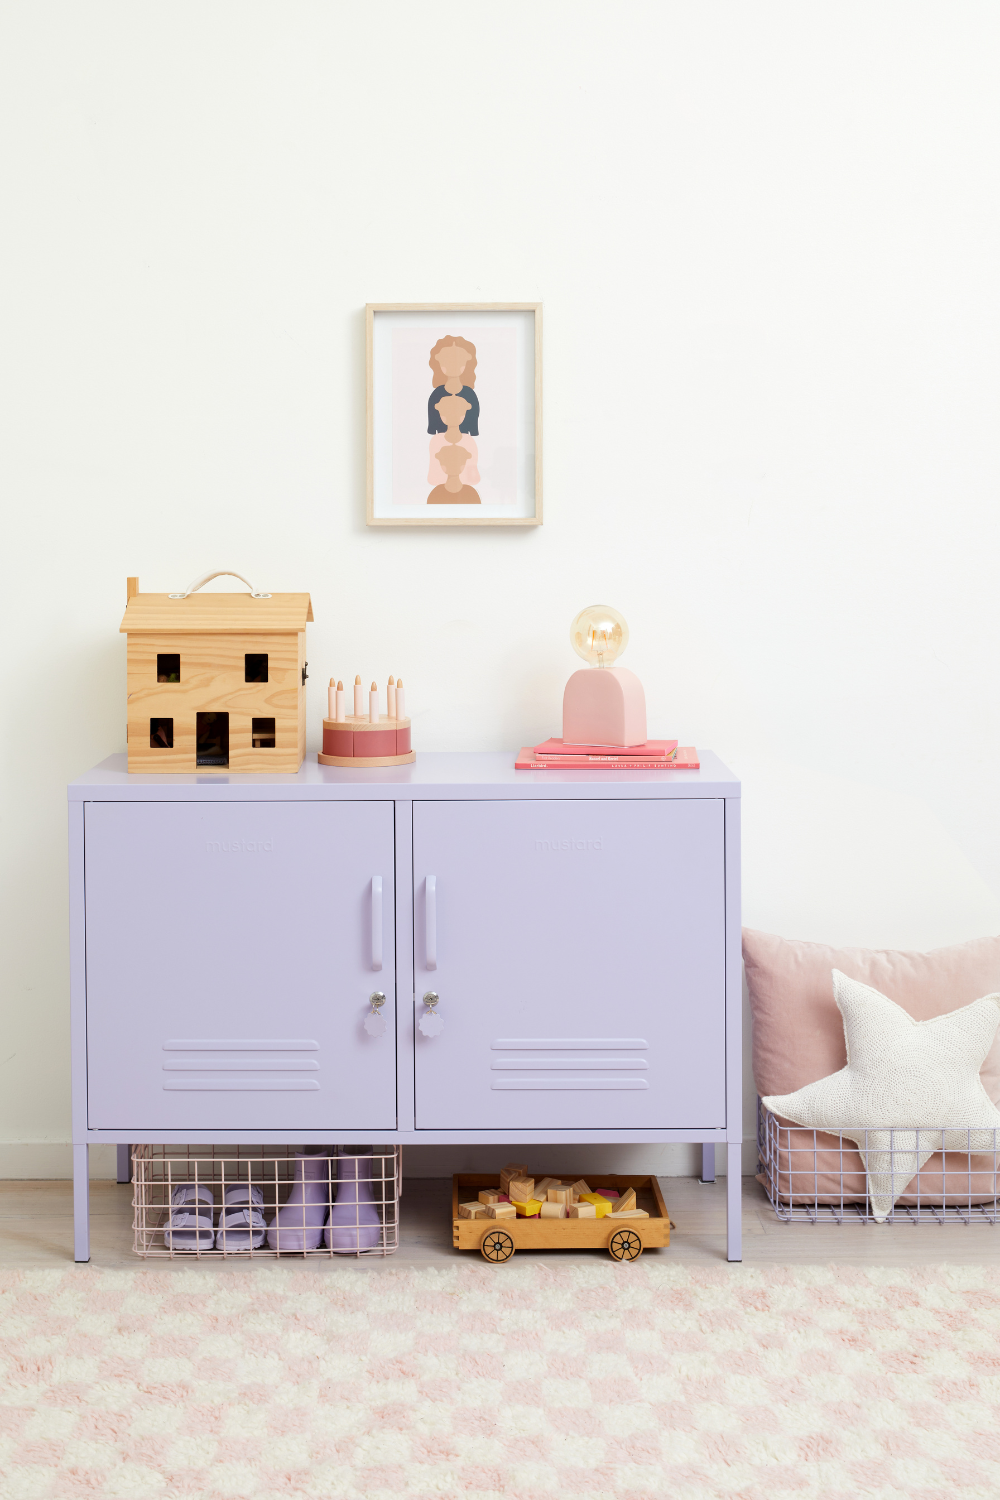 A Lilac Lowdown sits in a kids room styled with wooden toys and Blush soft furnishings. There is a blush and white checked rug on the floor.